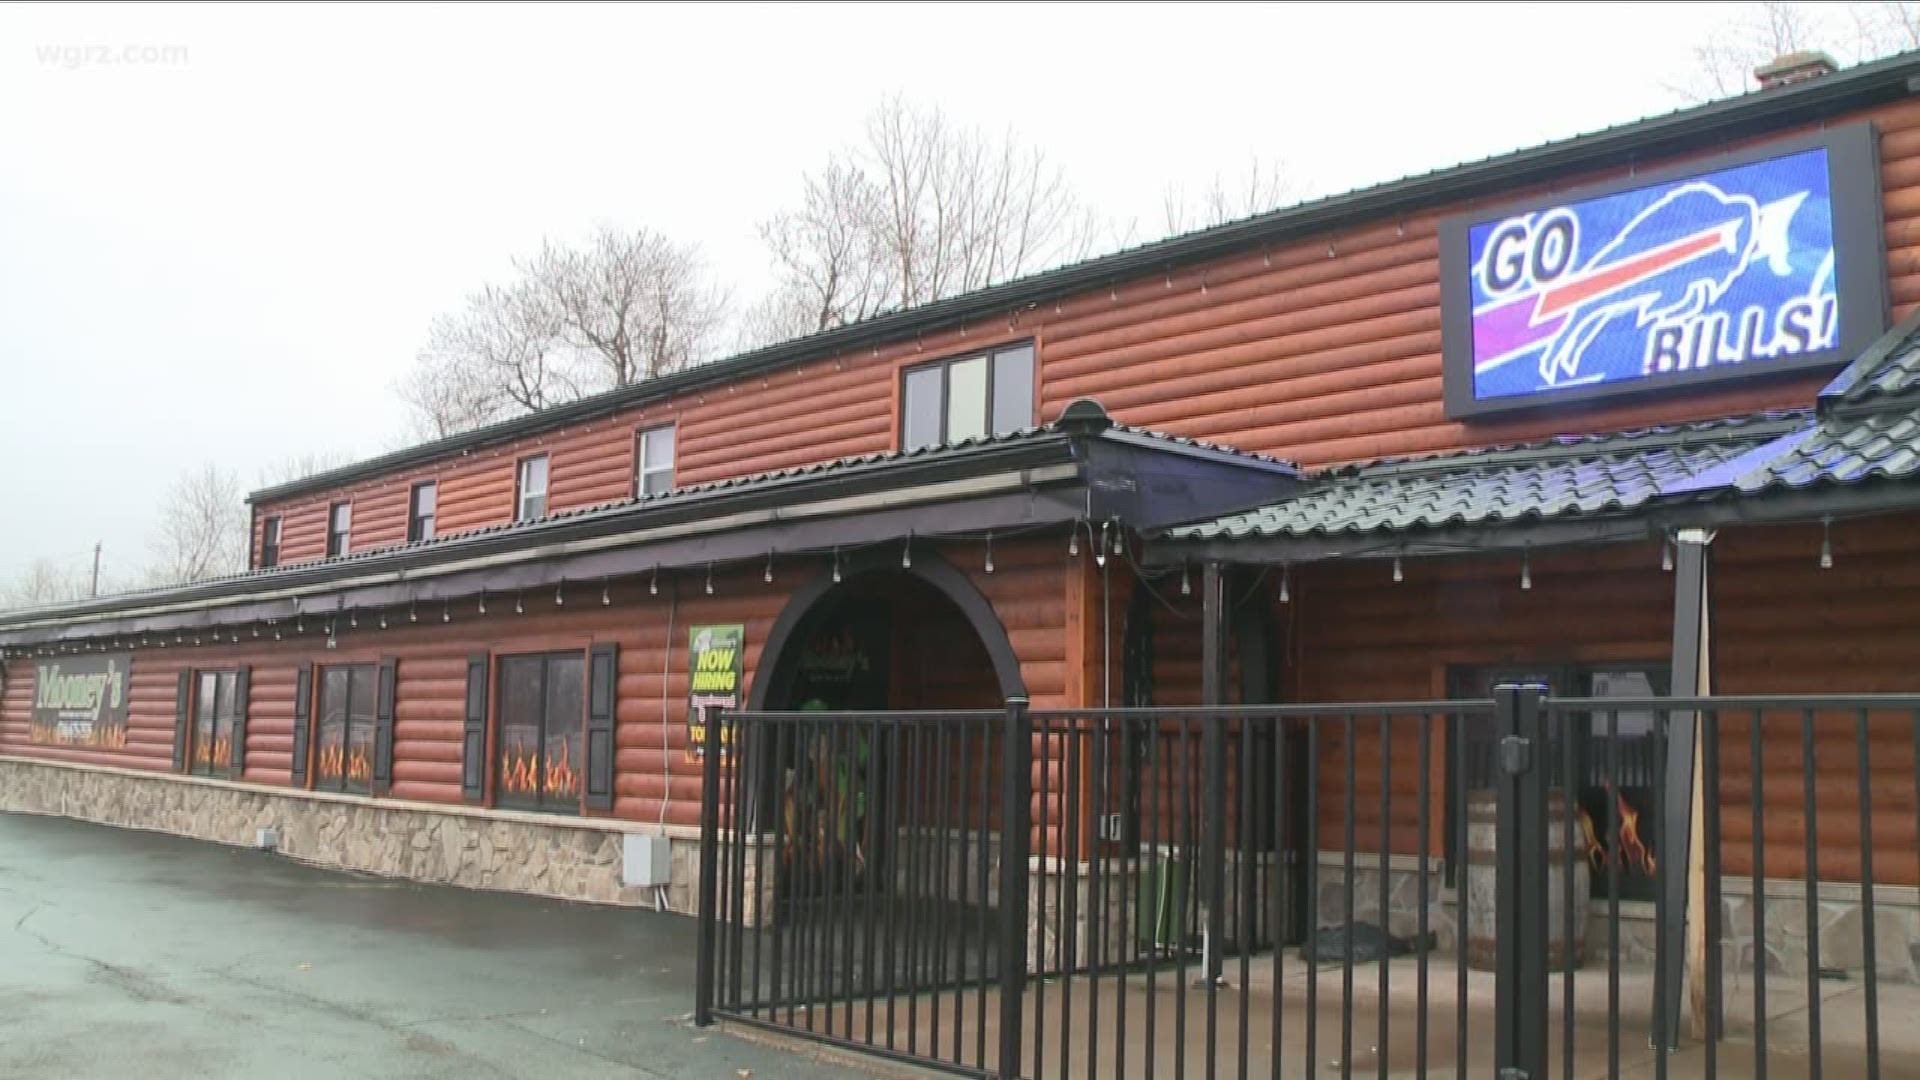 If you take a look around Western New York, you'll notice some local businesses are also putting their Buffalo Bills pride on display.